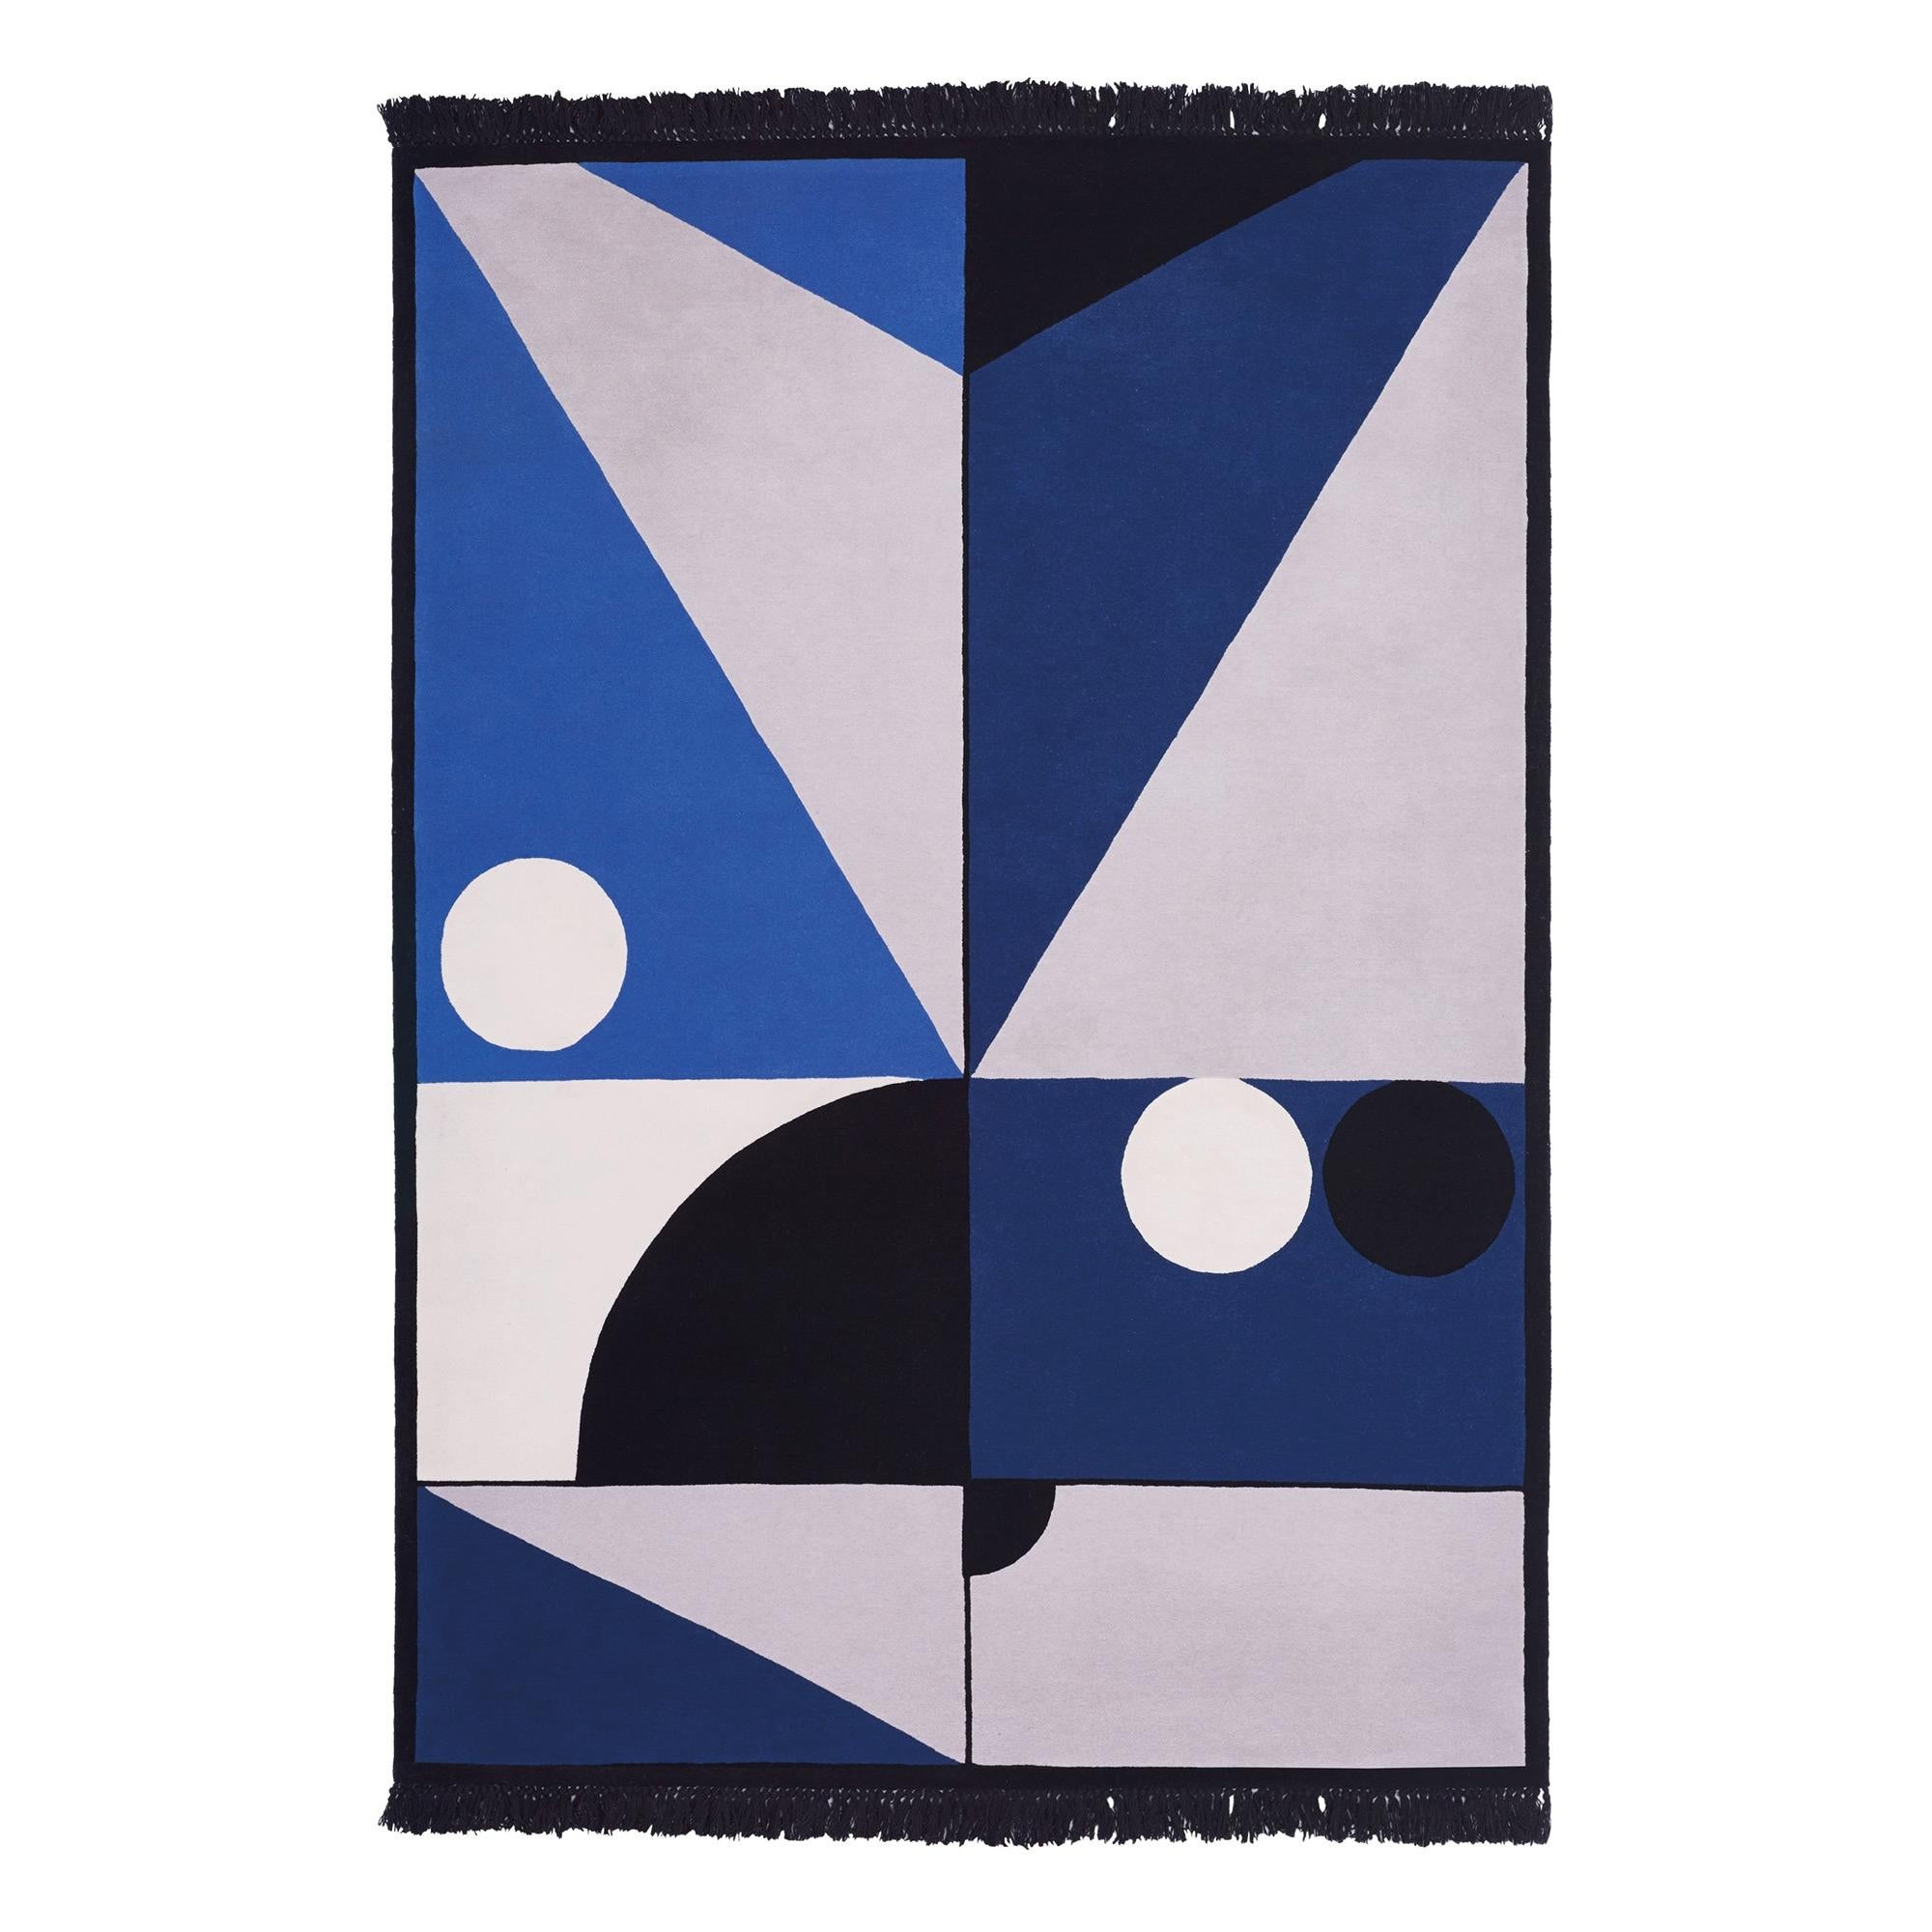 Shangai by Night N°2 rug by Thomas Dariel 
Dimensions: D 240 x W 170 cm 
Materials: New Zealand Wool. 
Also available in other colors, designs, and dimensions.


Vibration, perspective, energy, Shanghai By Night is an interpretation of what